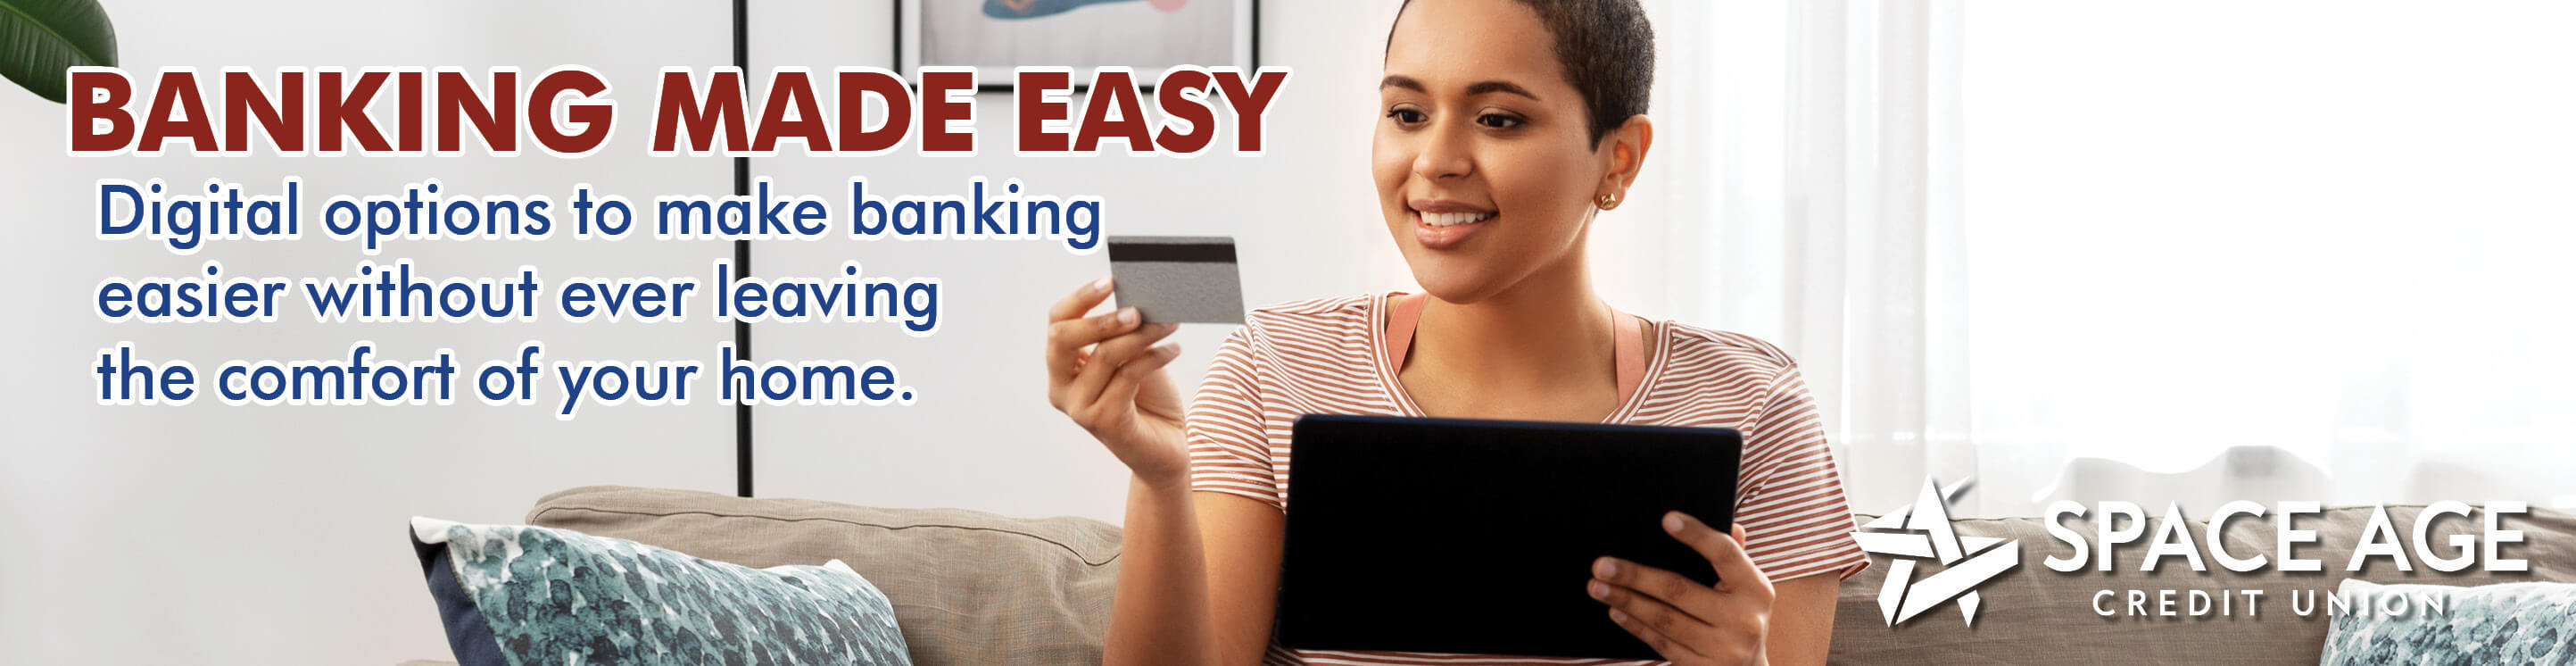 Pay your bills, get a loan and more without ever having to leave your home.